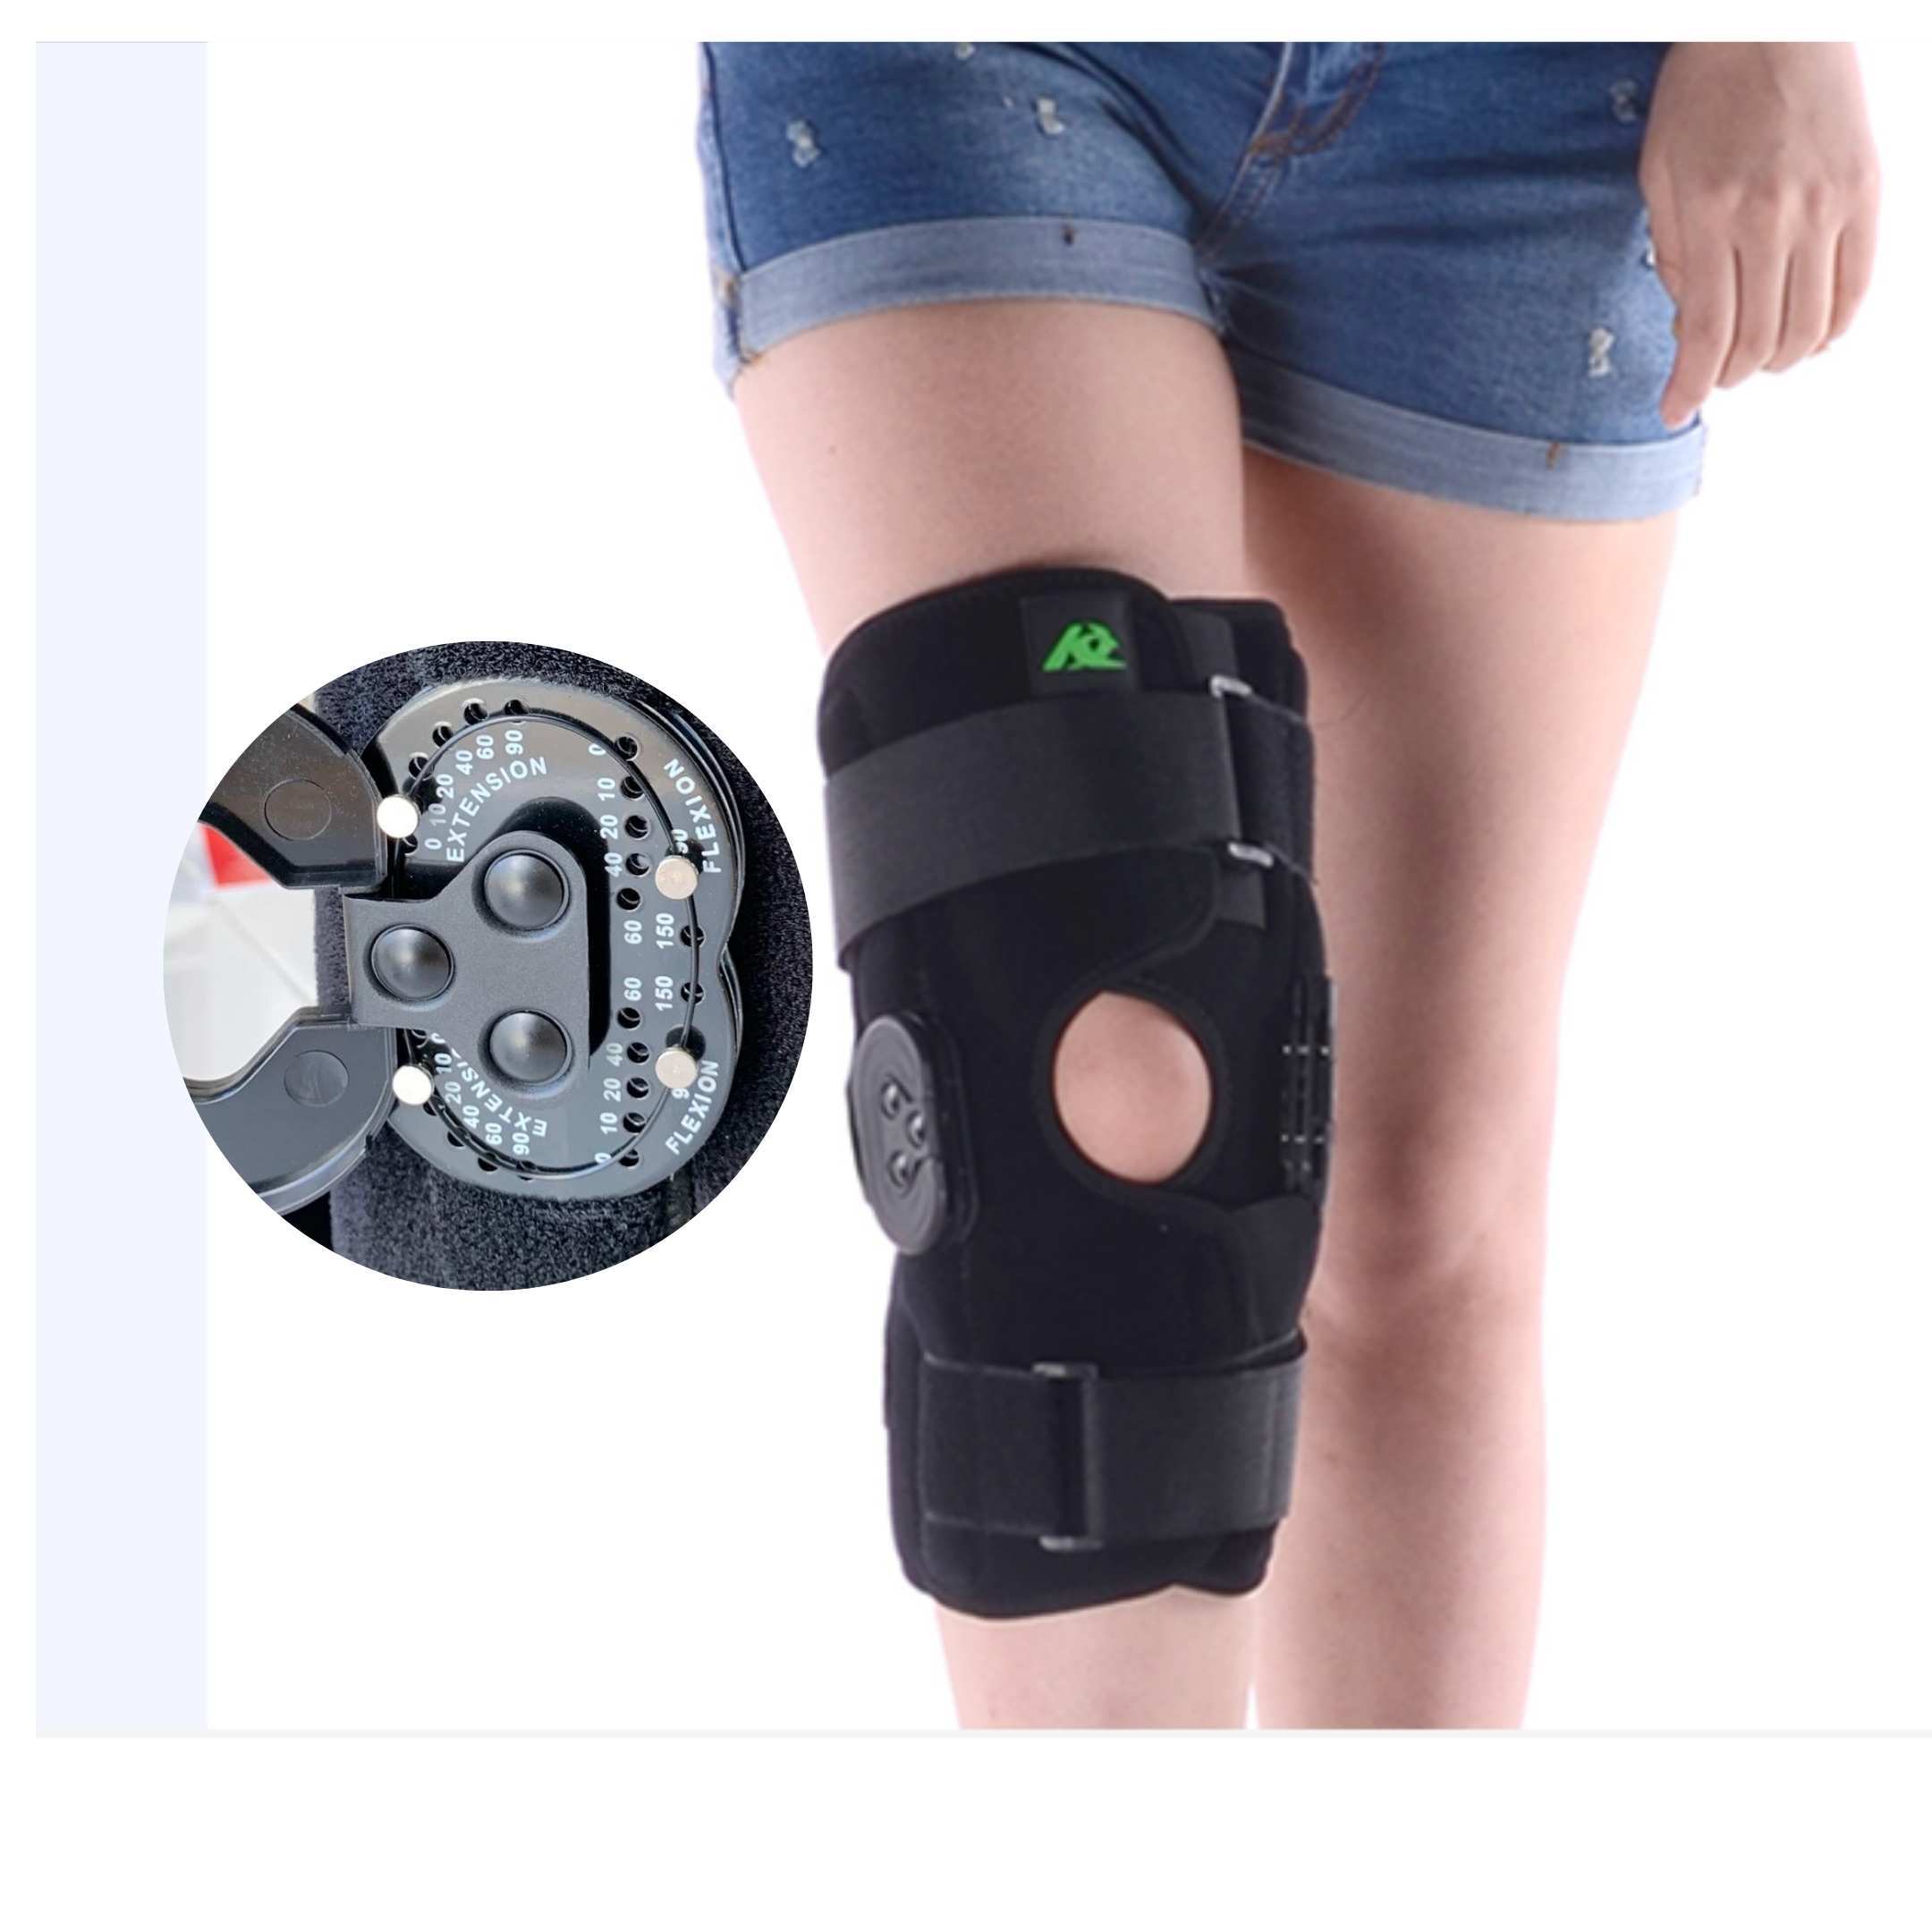 BELT SUPPORT CARE HEALTH BRACE PHYSIO DECOMPRESSION BACK RELIEF WAIST LUMBAR TRACTION BACKACHE HEAT THERAPY PAIN MASSAGER PARENT